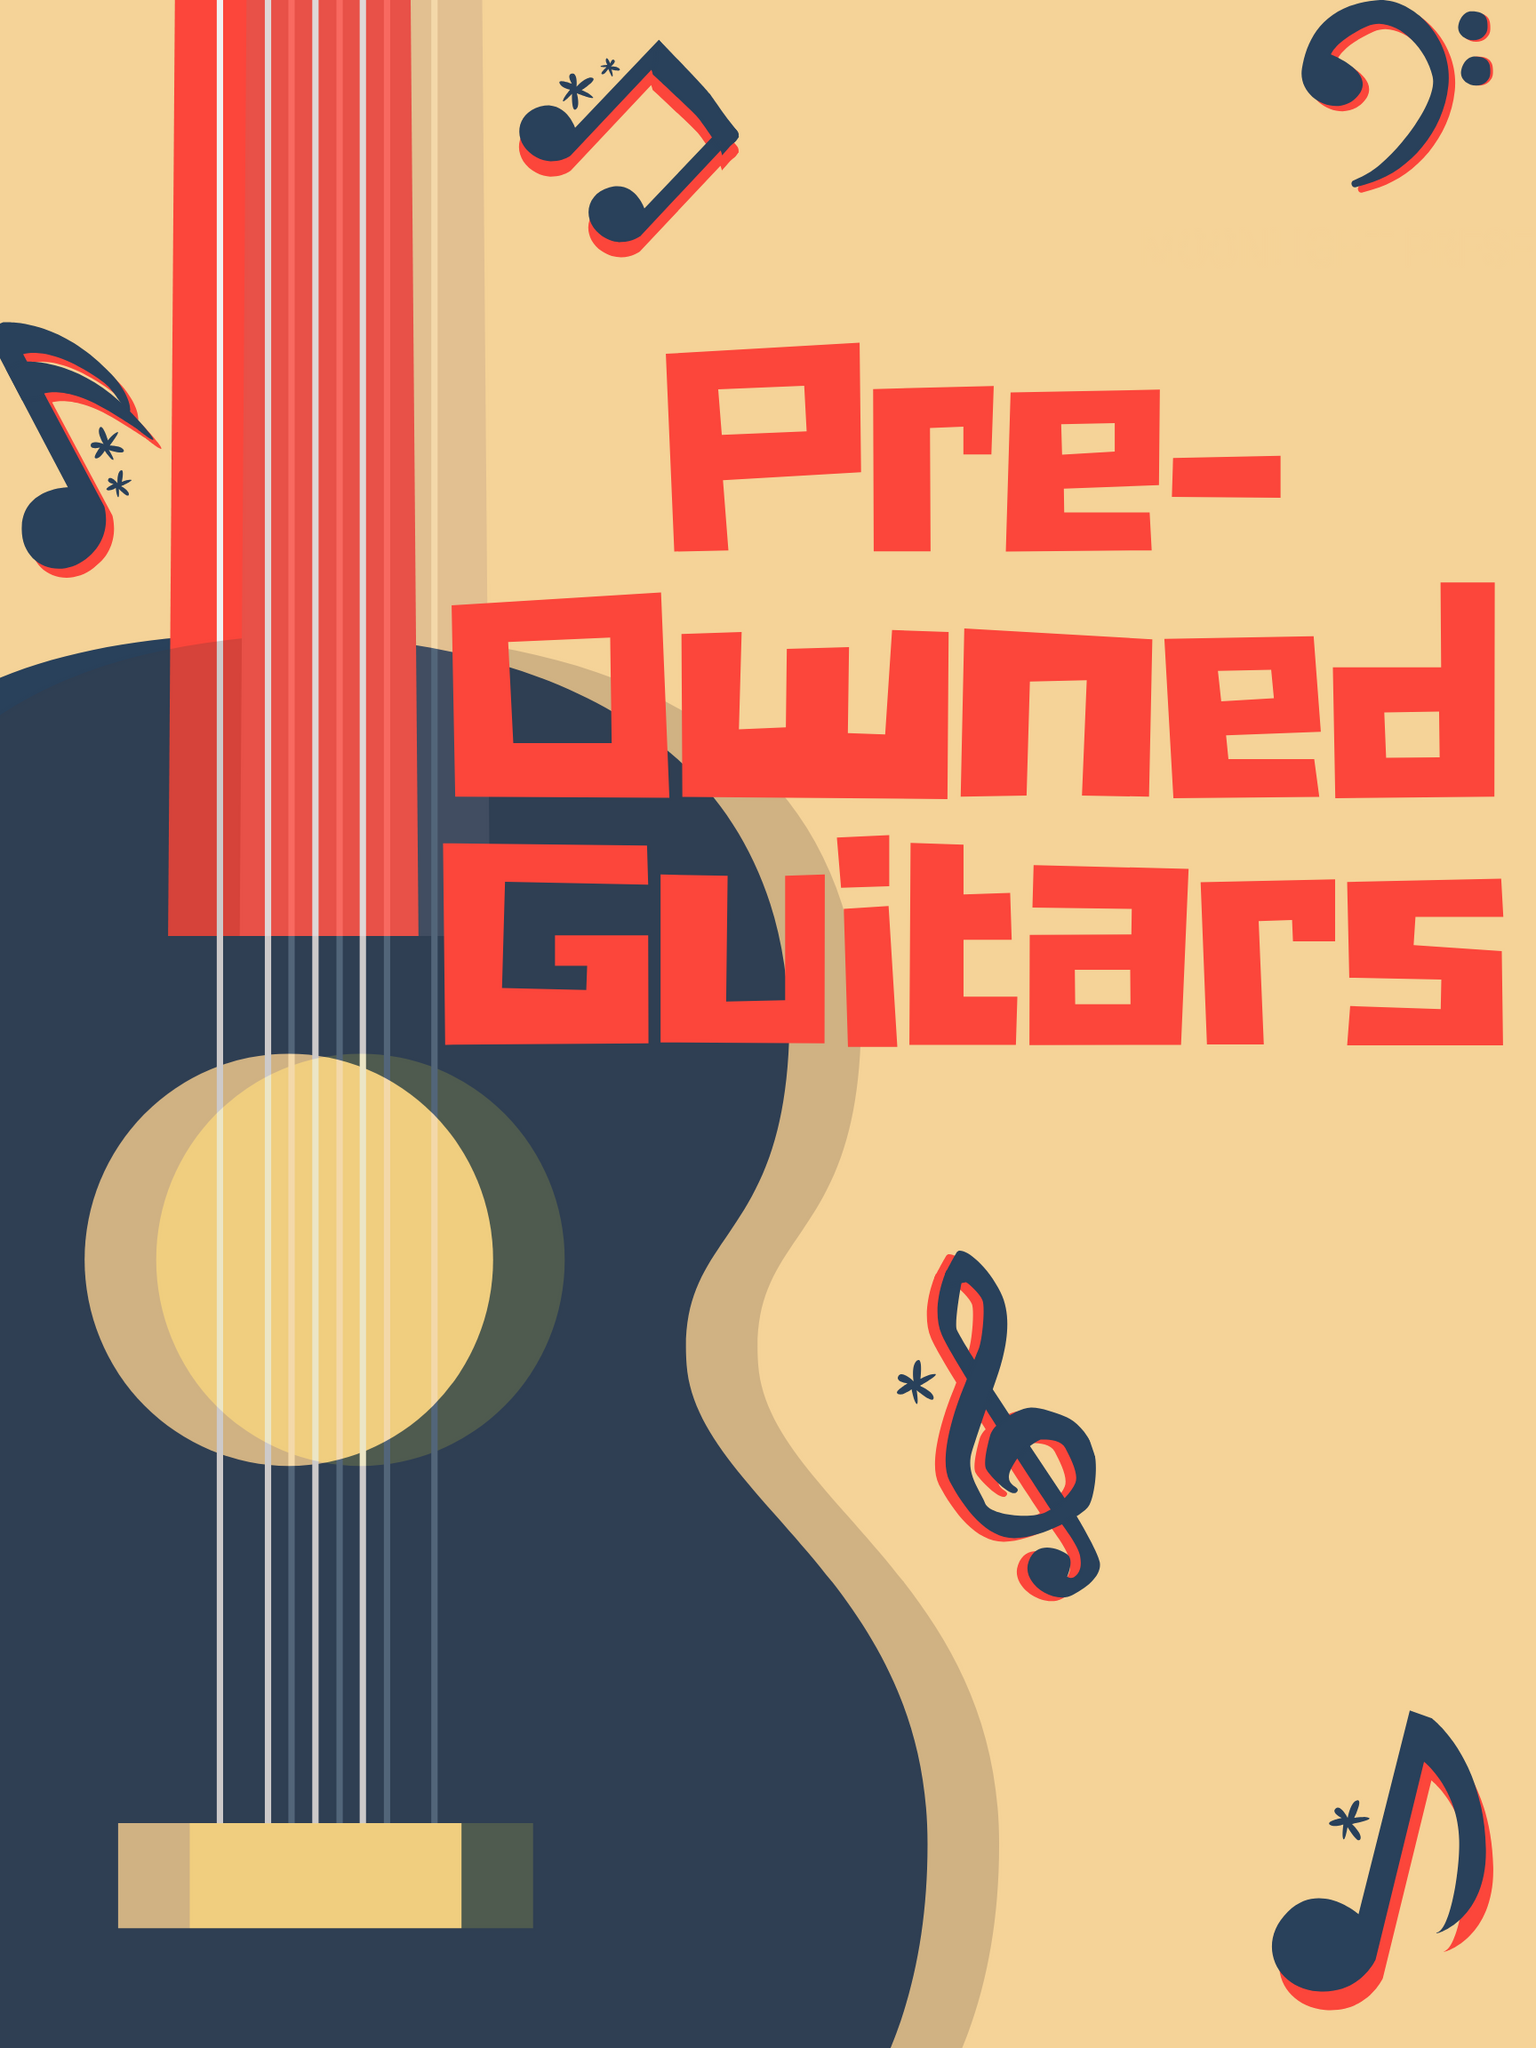 Pre-owned Guitars